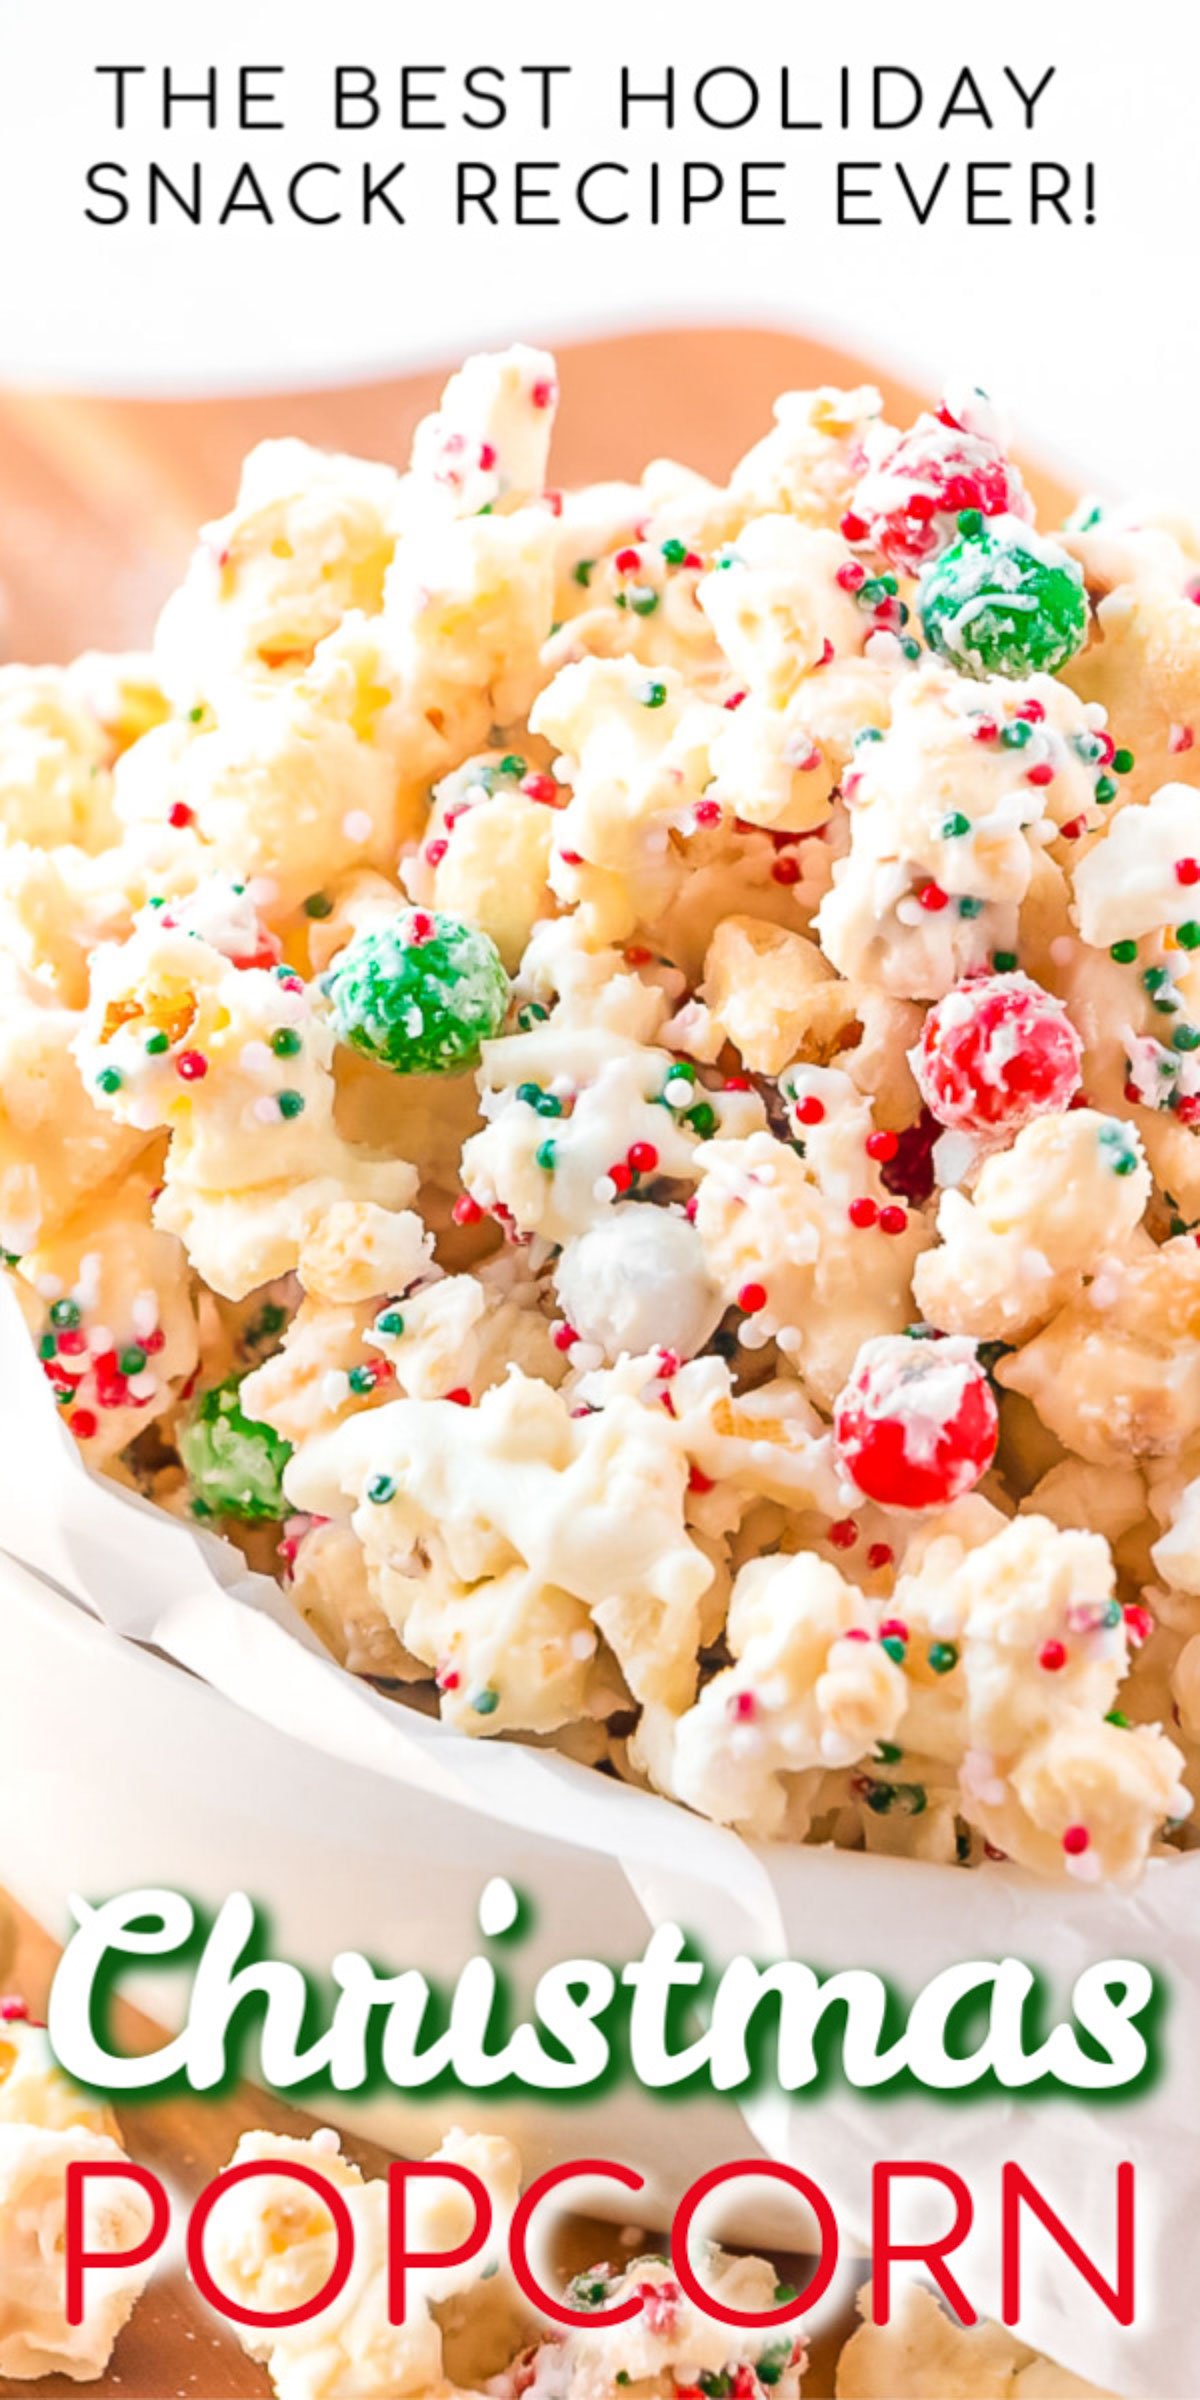 Christmas Popcorn is an easy a delicious treat made with kettle corn, cake mix, white chocolate, and sprinkles! It's perfect for a Christmas Movie Night!  via @sugarandsoulco